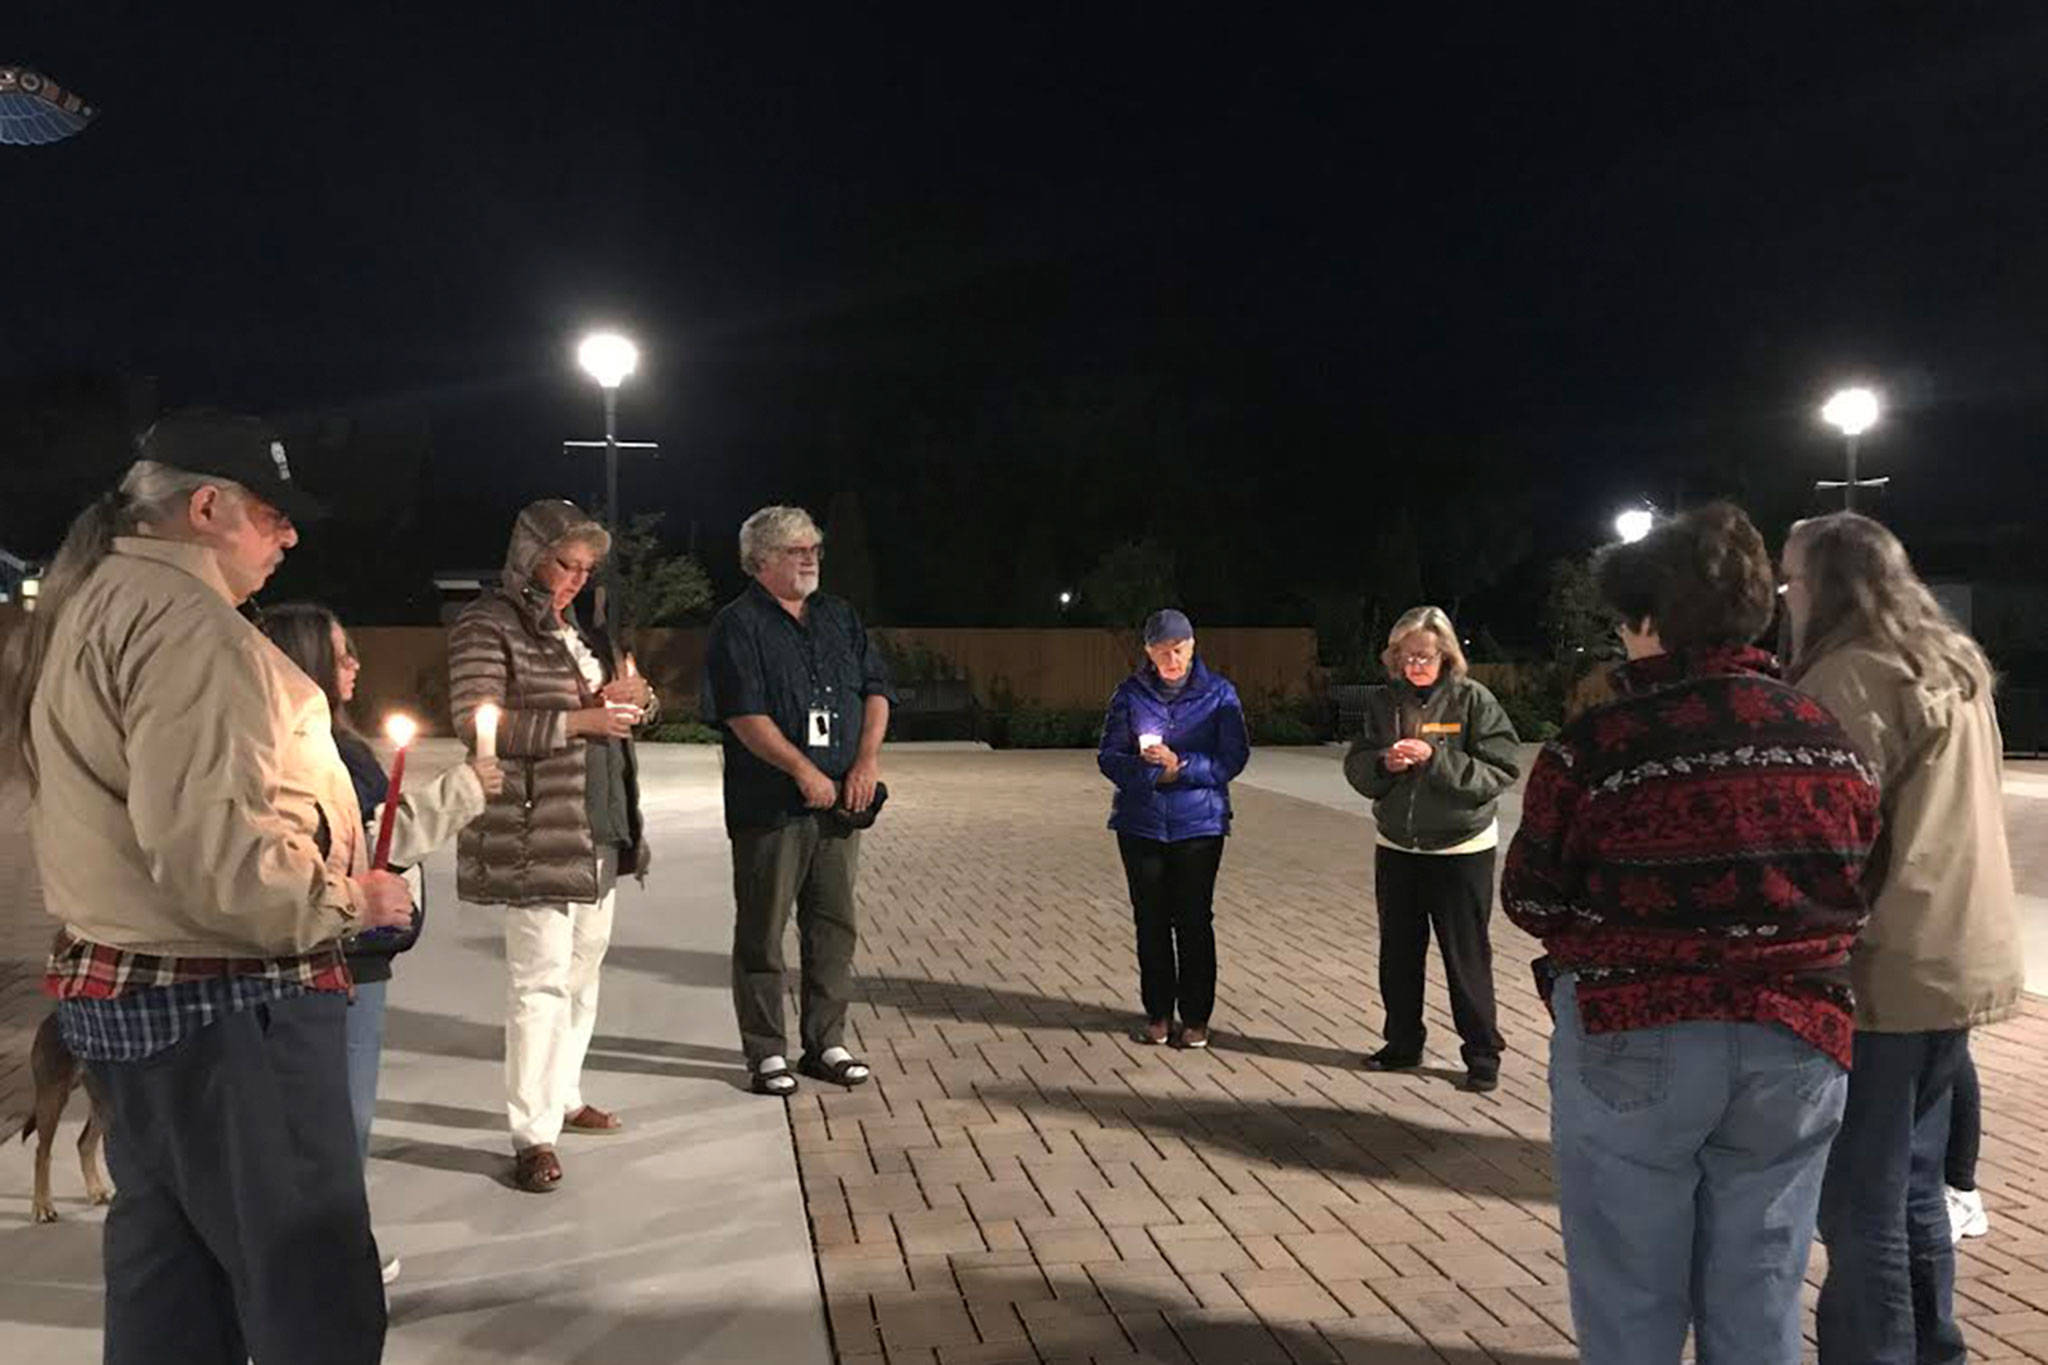 A group of more than 10 Sequim residents gathers at 7:30 p.m. Monday at the Sequim Civic Center to hold a candlelight vigil for victims of the Las Vegas shooting that killed more than 50 people and injured more than 500 last Sunday at a country music concert. (Erin Hawkins/Olympic Peninsula News Group)